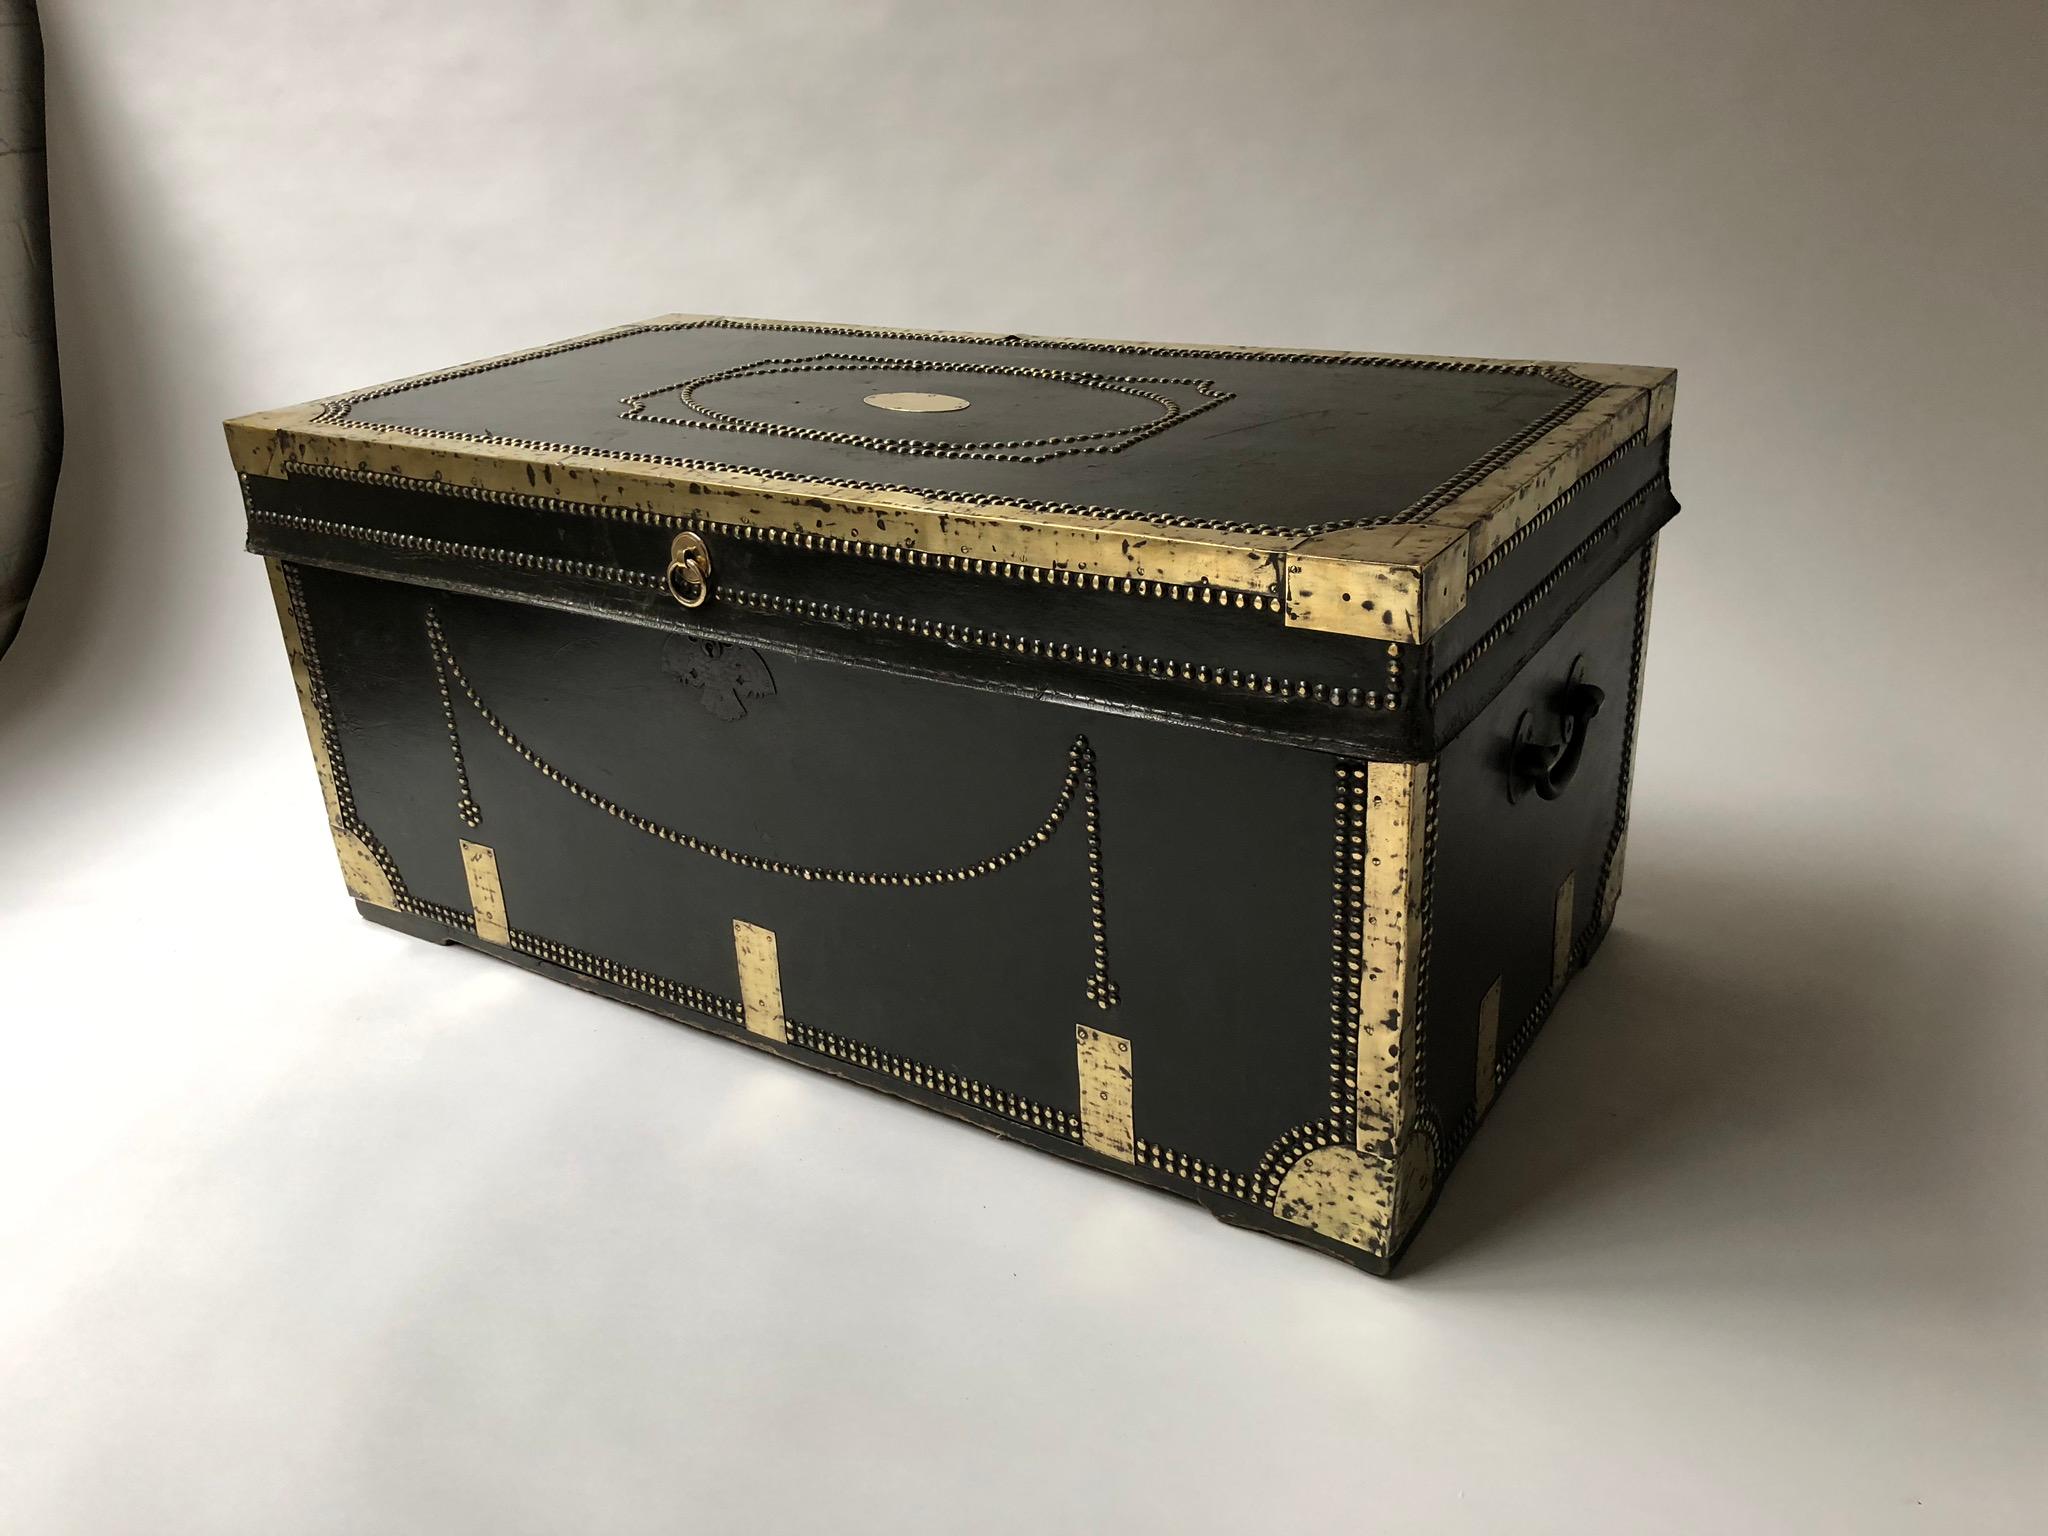 Hand-Crafted Early 19th Century Brass Bound and Studded Leather Covered Travelling Trunk